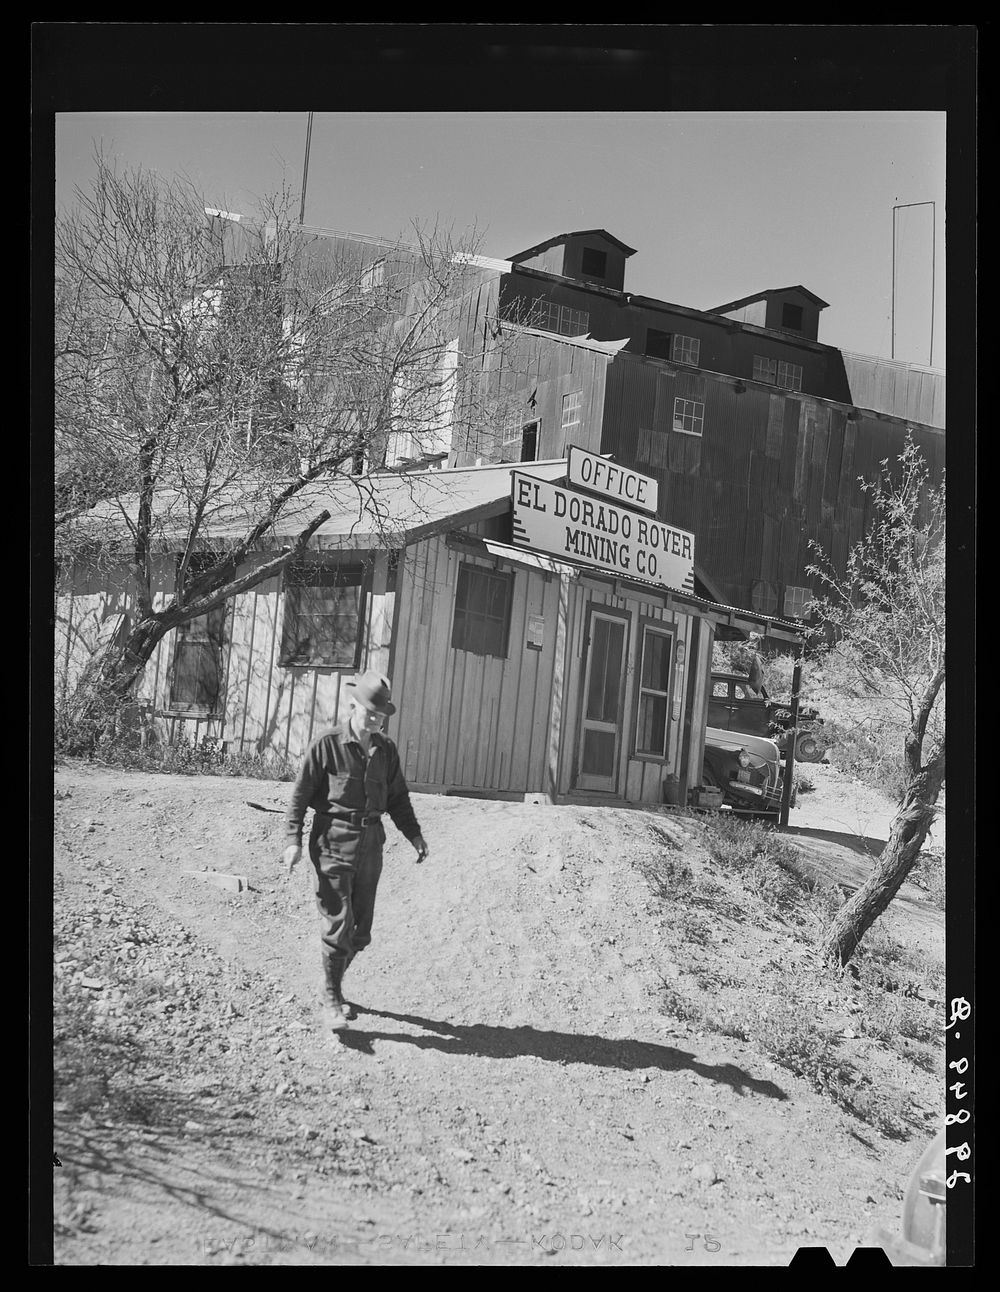 Gold mine office. El Dorado Canyon, Clark County, Nevada. Sourced from the Library of Congress.